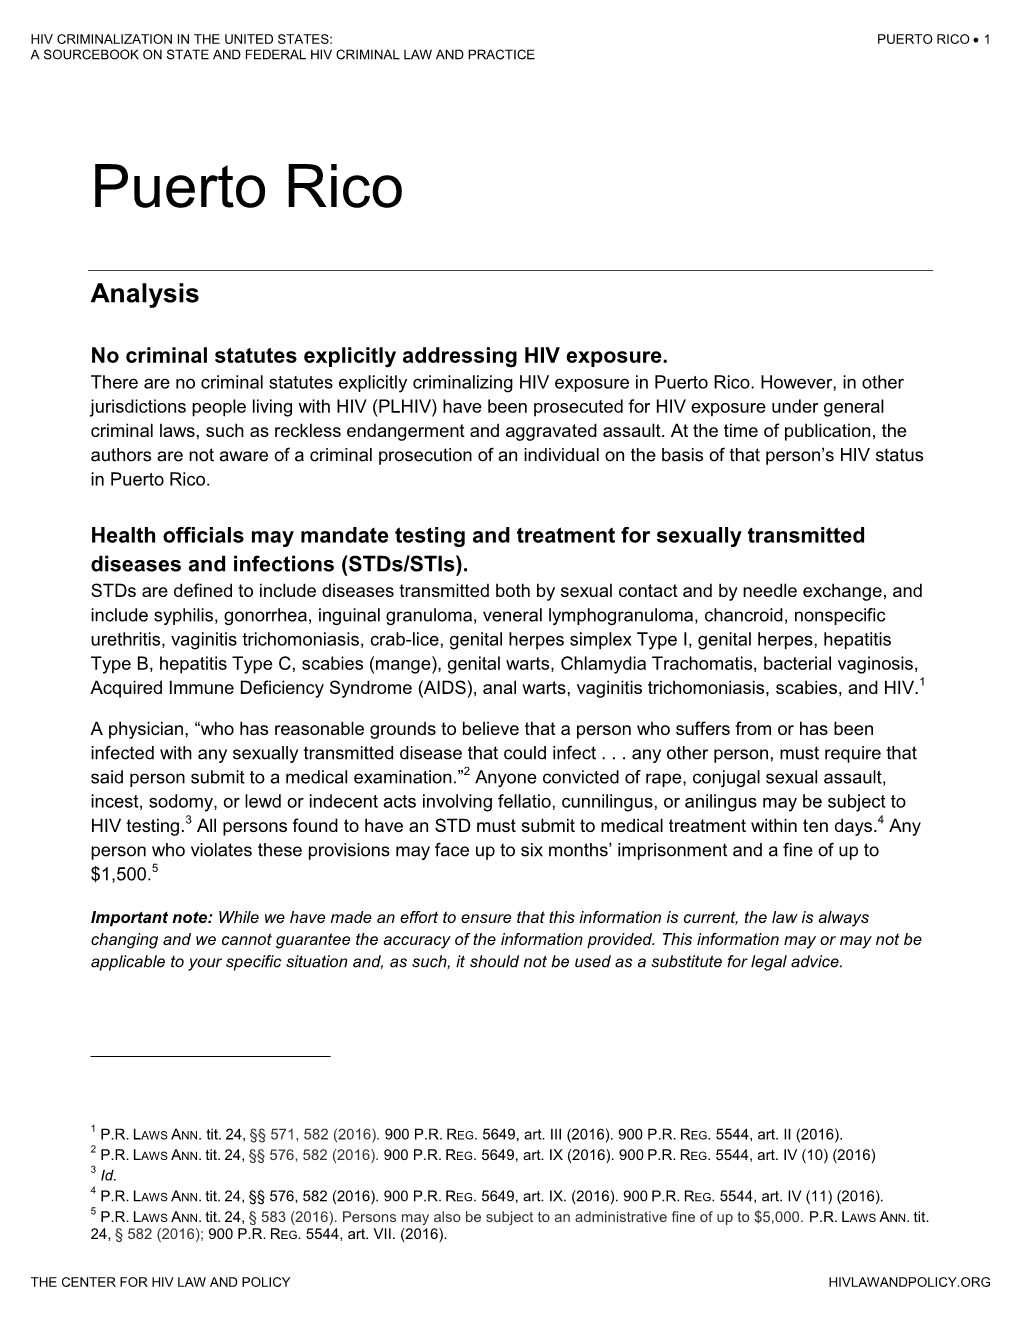 Puerto Rico  1 a Sourcebook on State and Federal Hiv Criminal Law and Practice